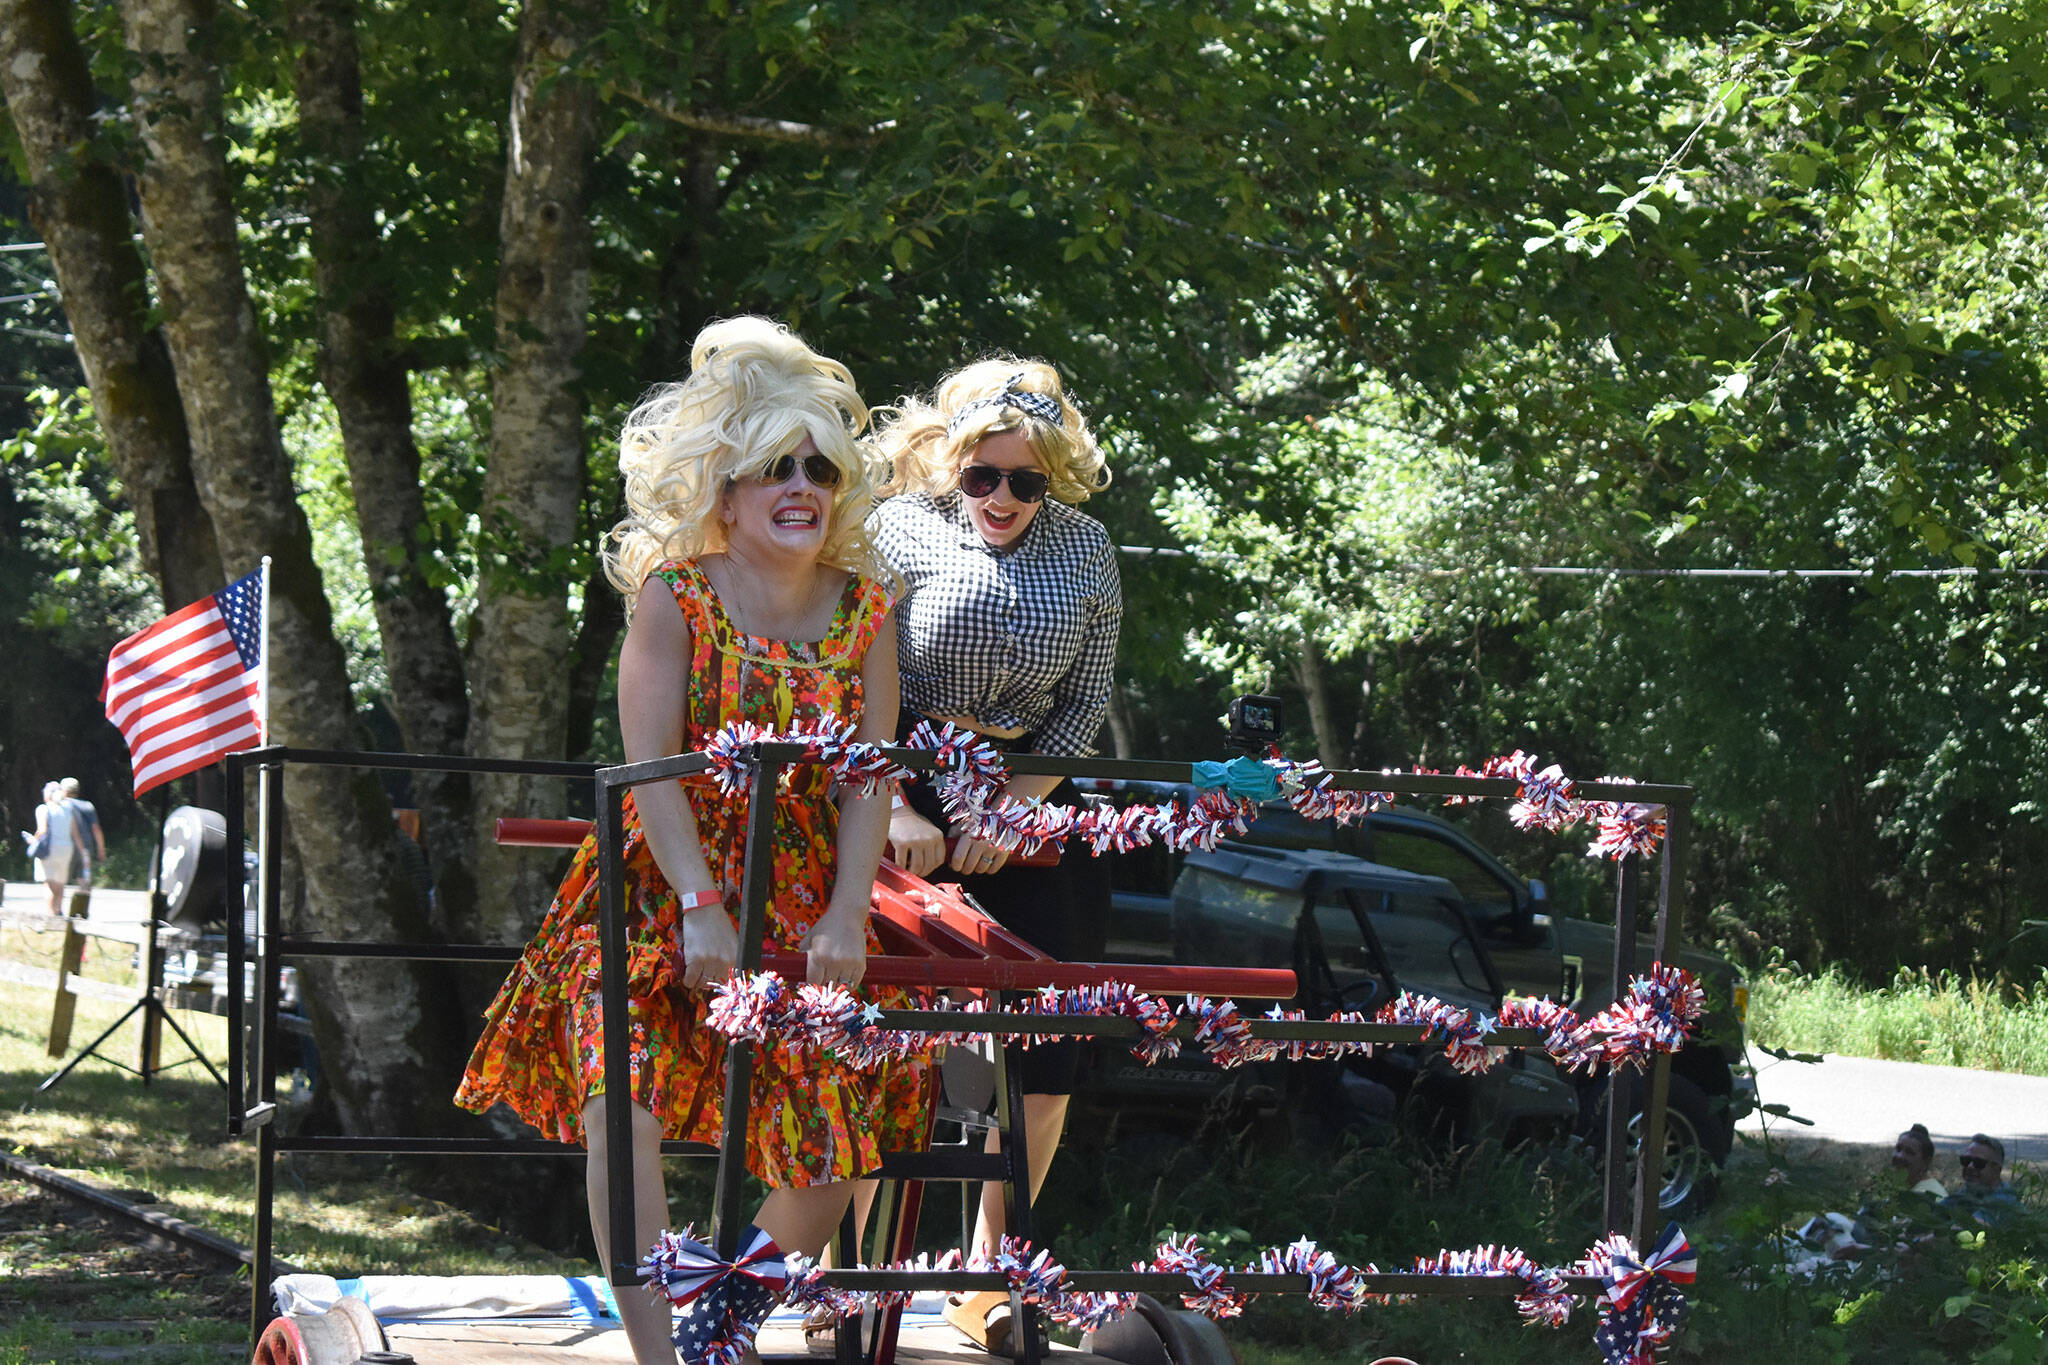 Racing in costume is a tradition for many at the handcar races. Photo by Alex Bruell